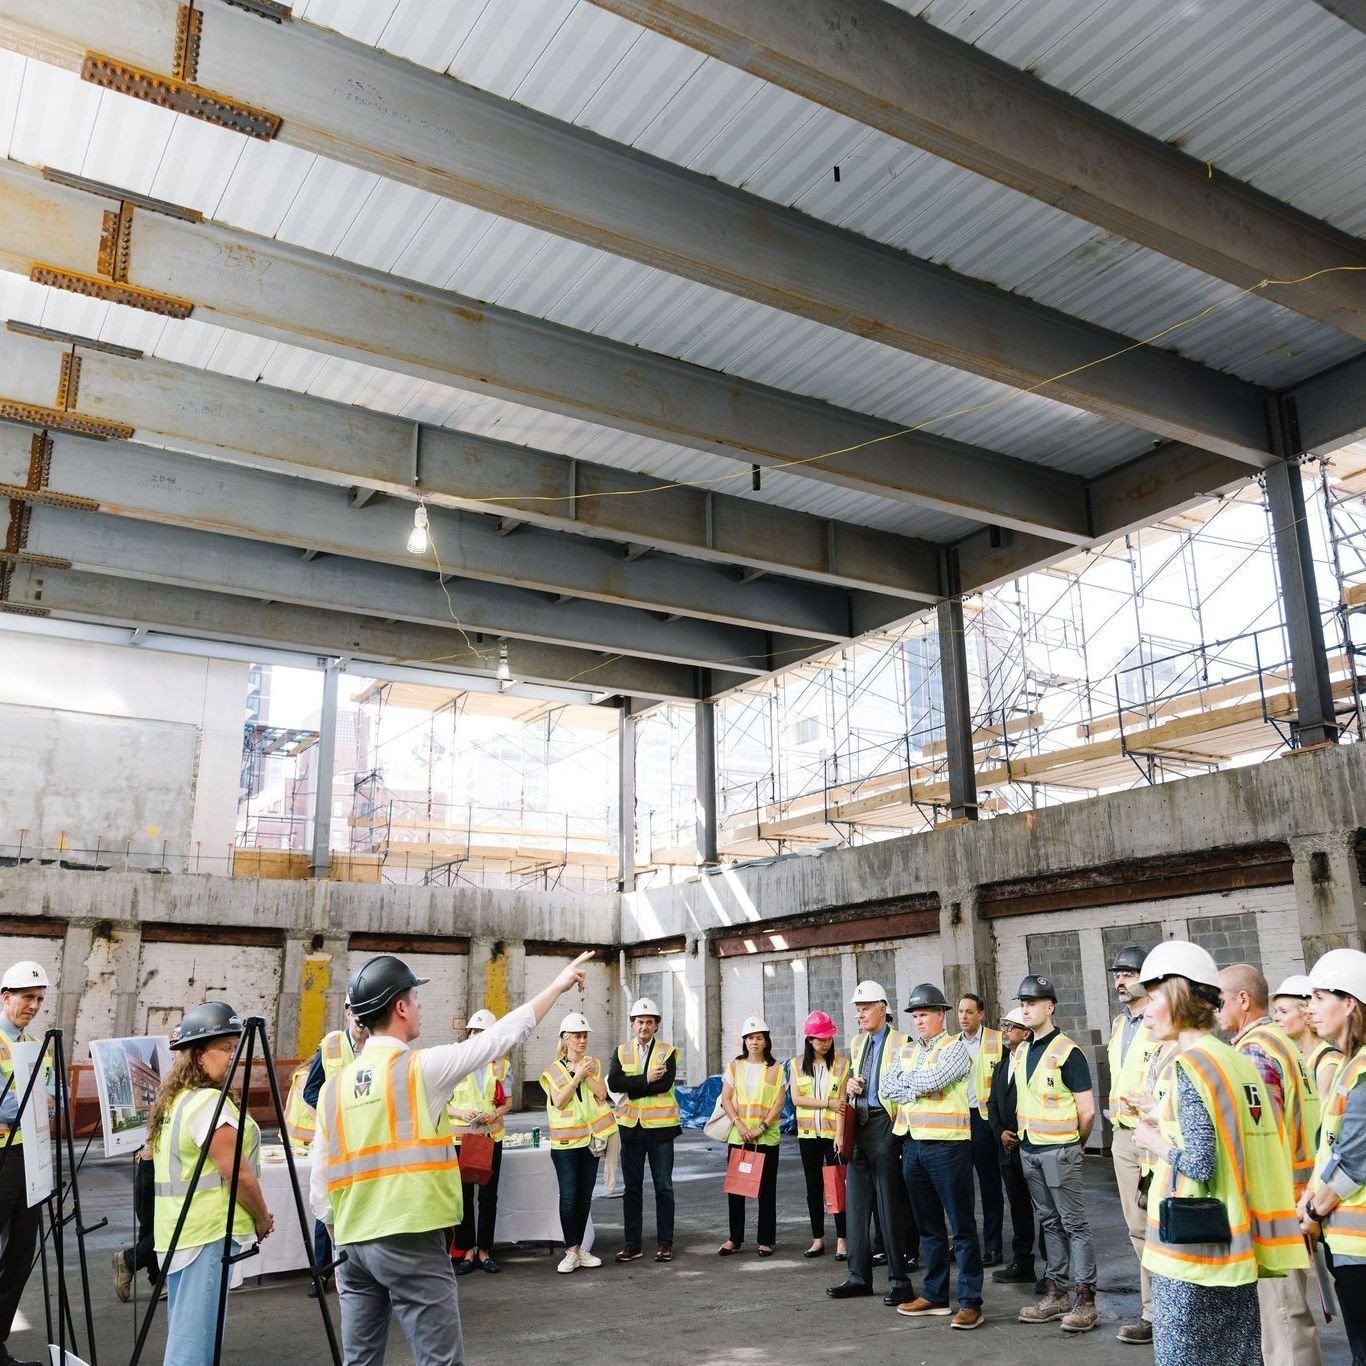 Raising the roof of our new Upper School! 🏗️ Our Campaign Co-Chairs celebrated a milestone last week with the Topping Off Ceremony, a time-honored construction tradition that marks the placement of the building's highest structural element.⁠
⁠
The n